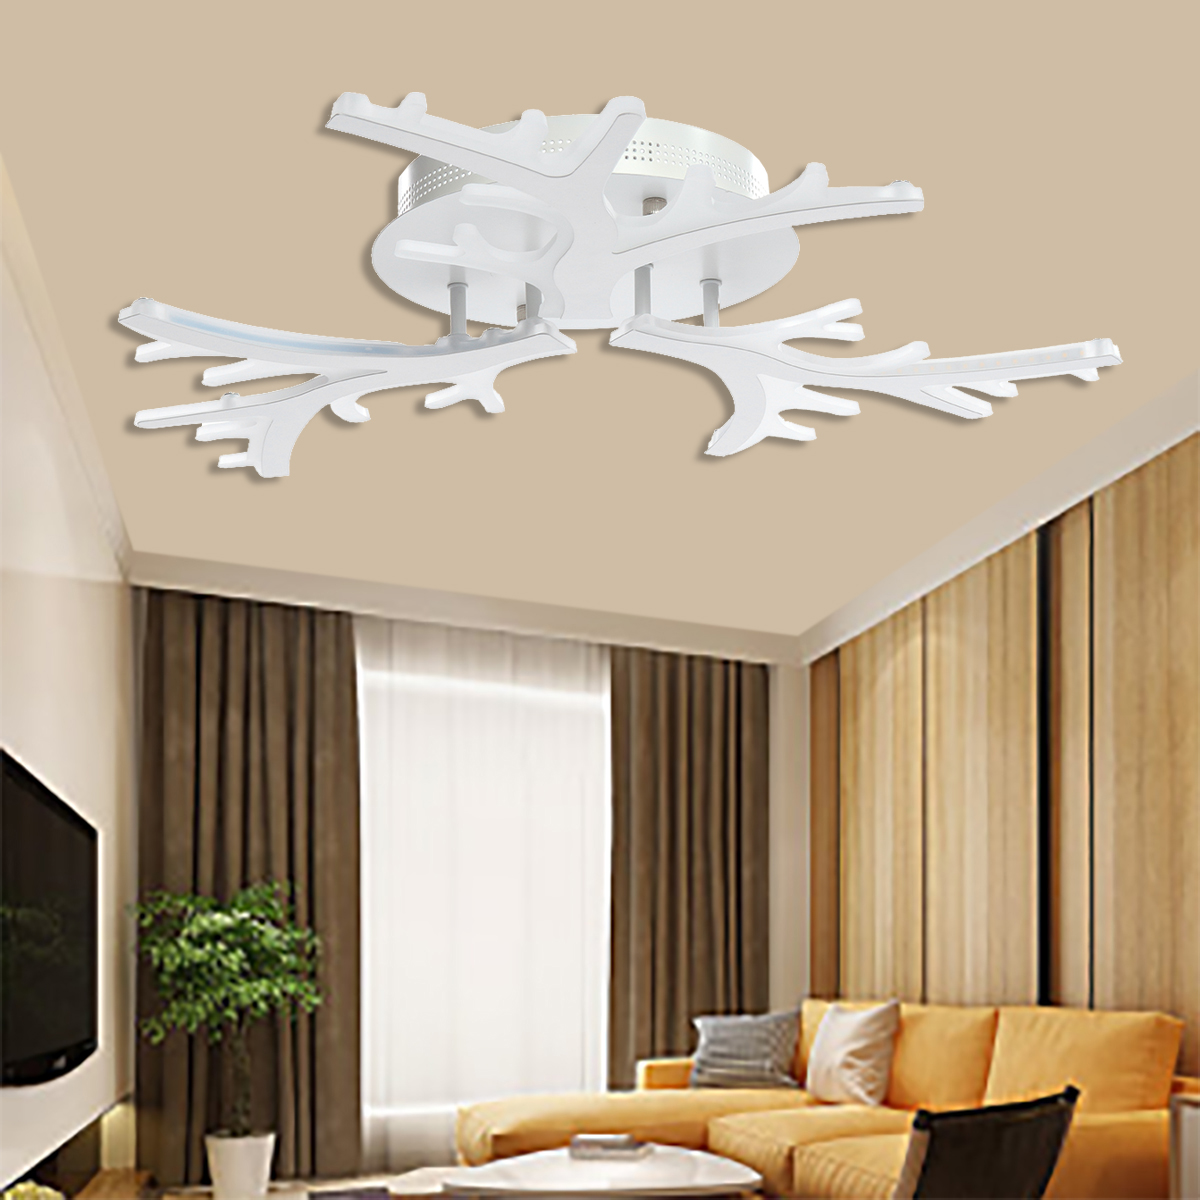 Find LED Ceiling Light Pendant Lamp Hallway Bedroom Dimmable Remote Fixture Decor for Sale on Gipsybee.com with cryptocurrencies